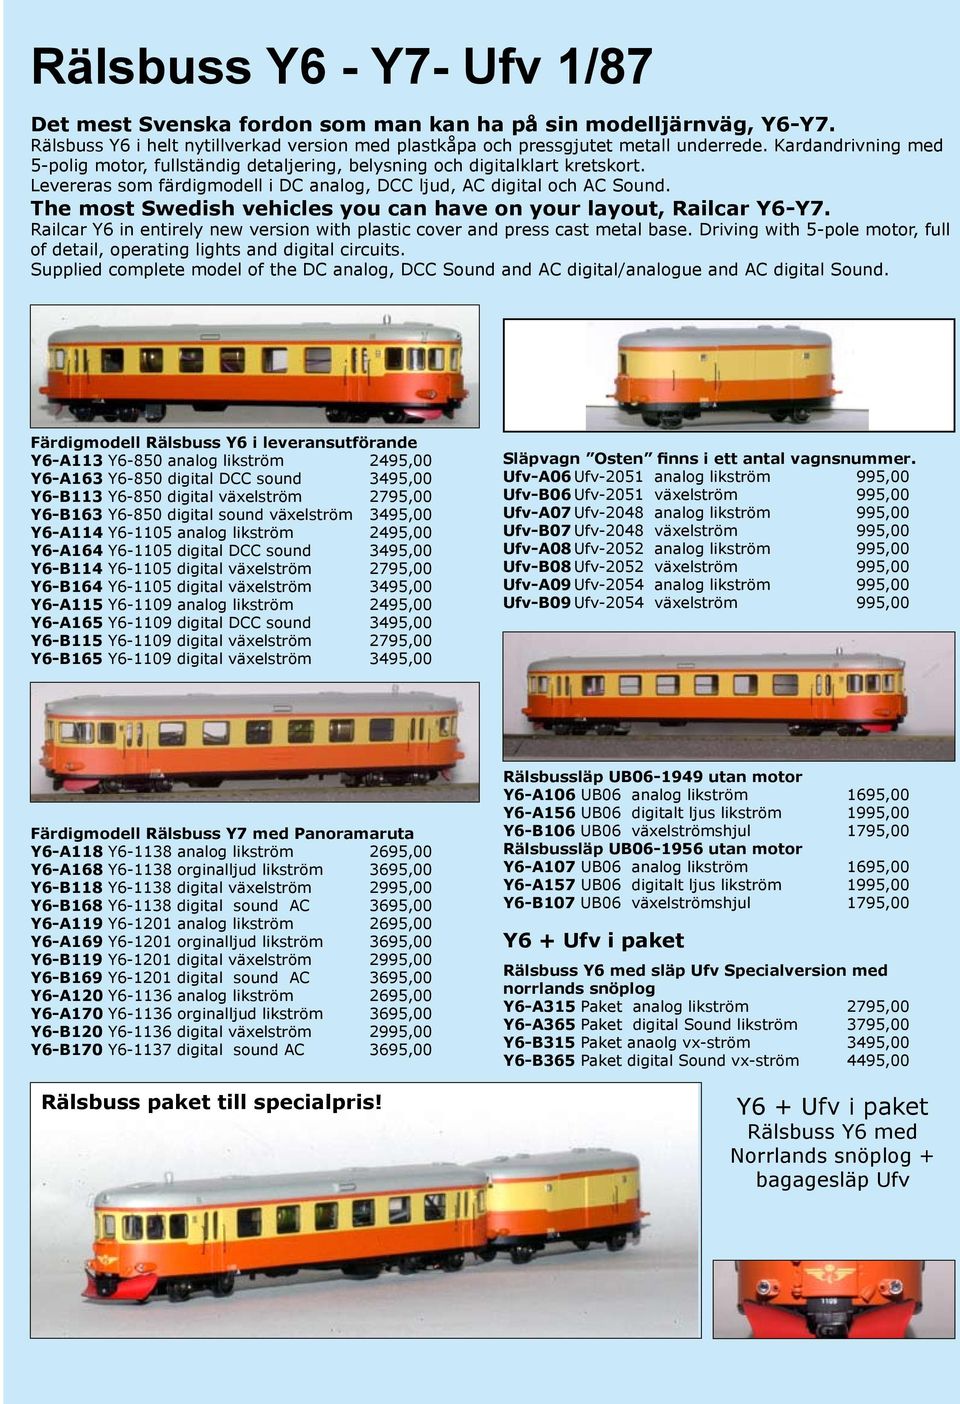 The most Swedish vehicles you can have on your layout, Railcar Y6-Y7. Railcar Y6 in entirely new version with plastic cover and press cast metal base.